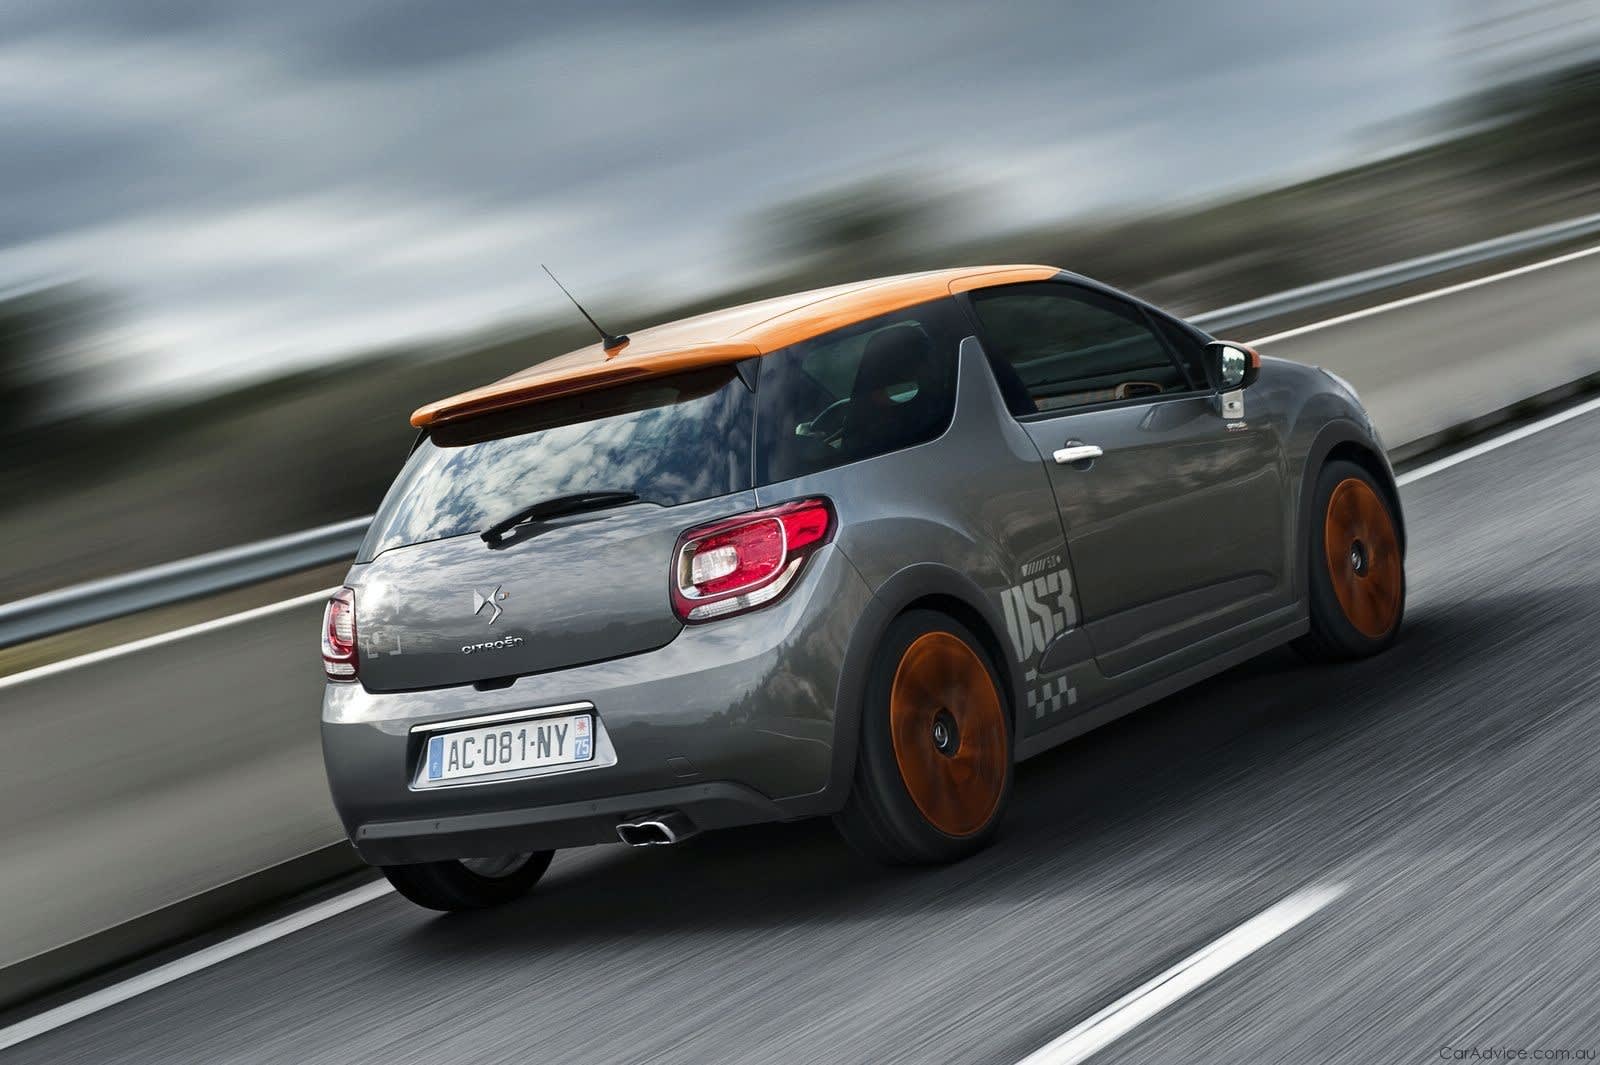 2010 Citroen DS3 Racing News and Information